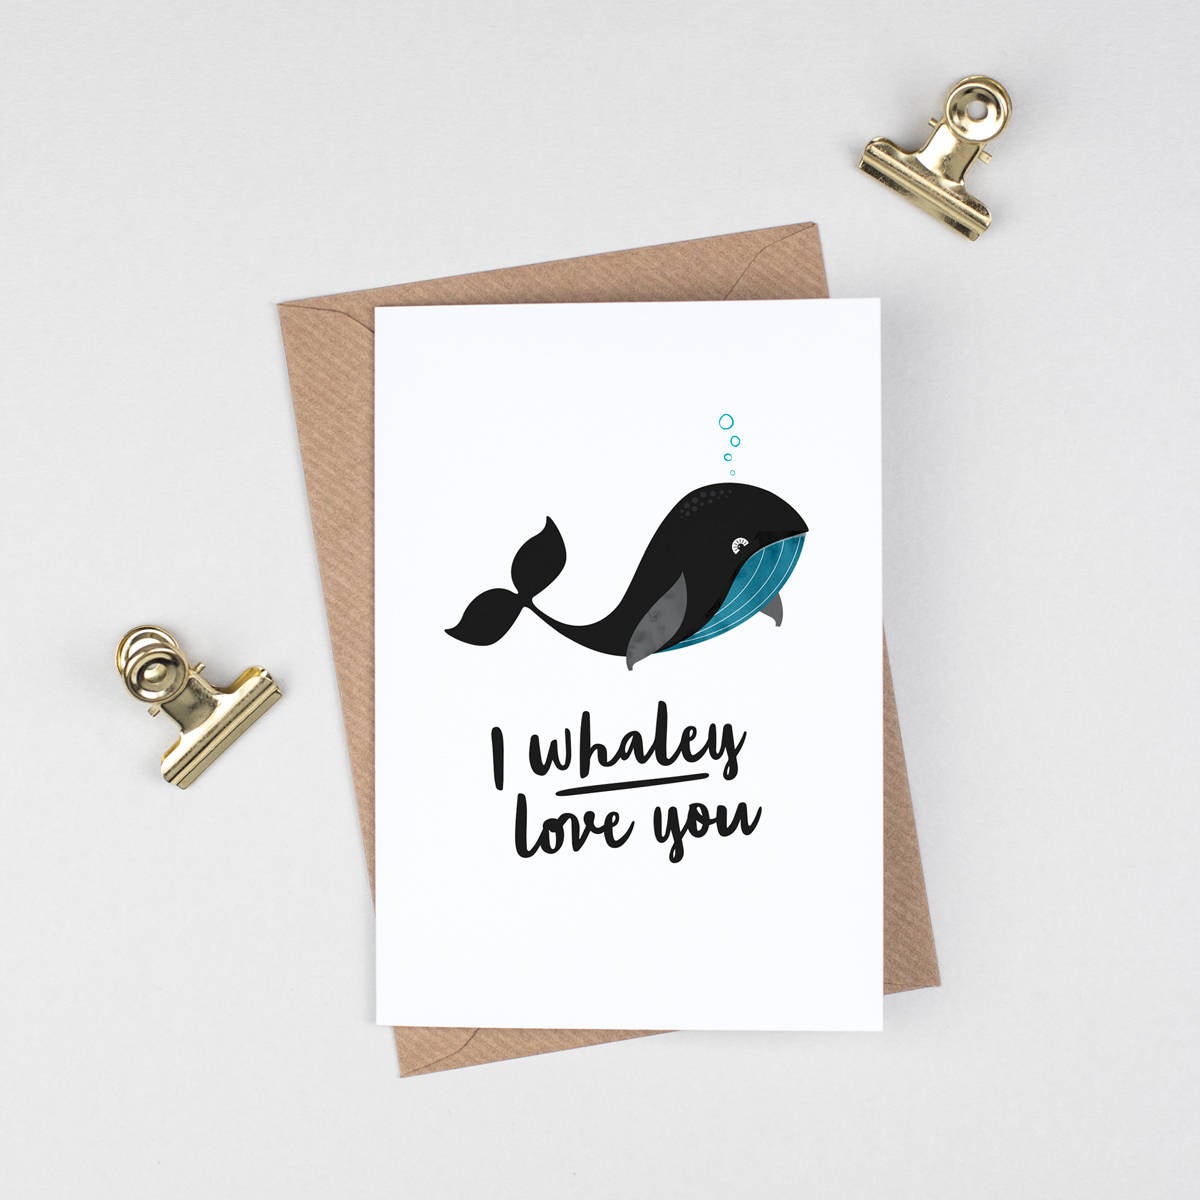 Whale Valentine's Card, Funny Love Card, Animal Pun, I Love You, Romantic Anniversary Engagement Card for Her, Him, Girlfriend, Boyfriend